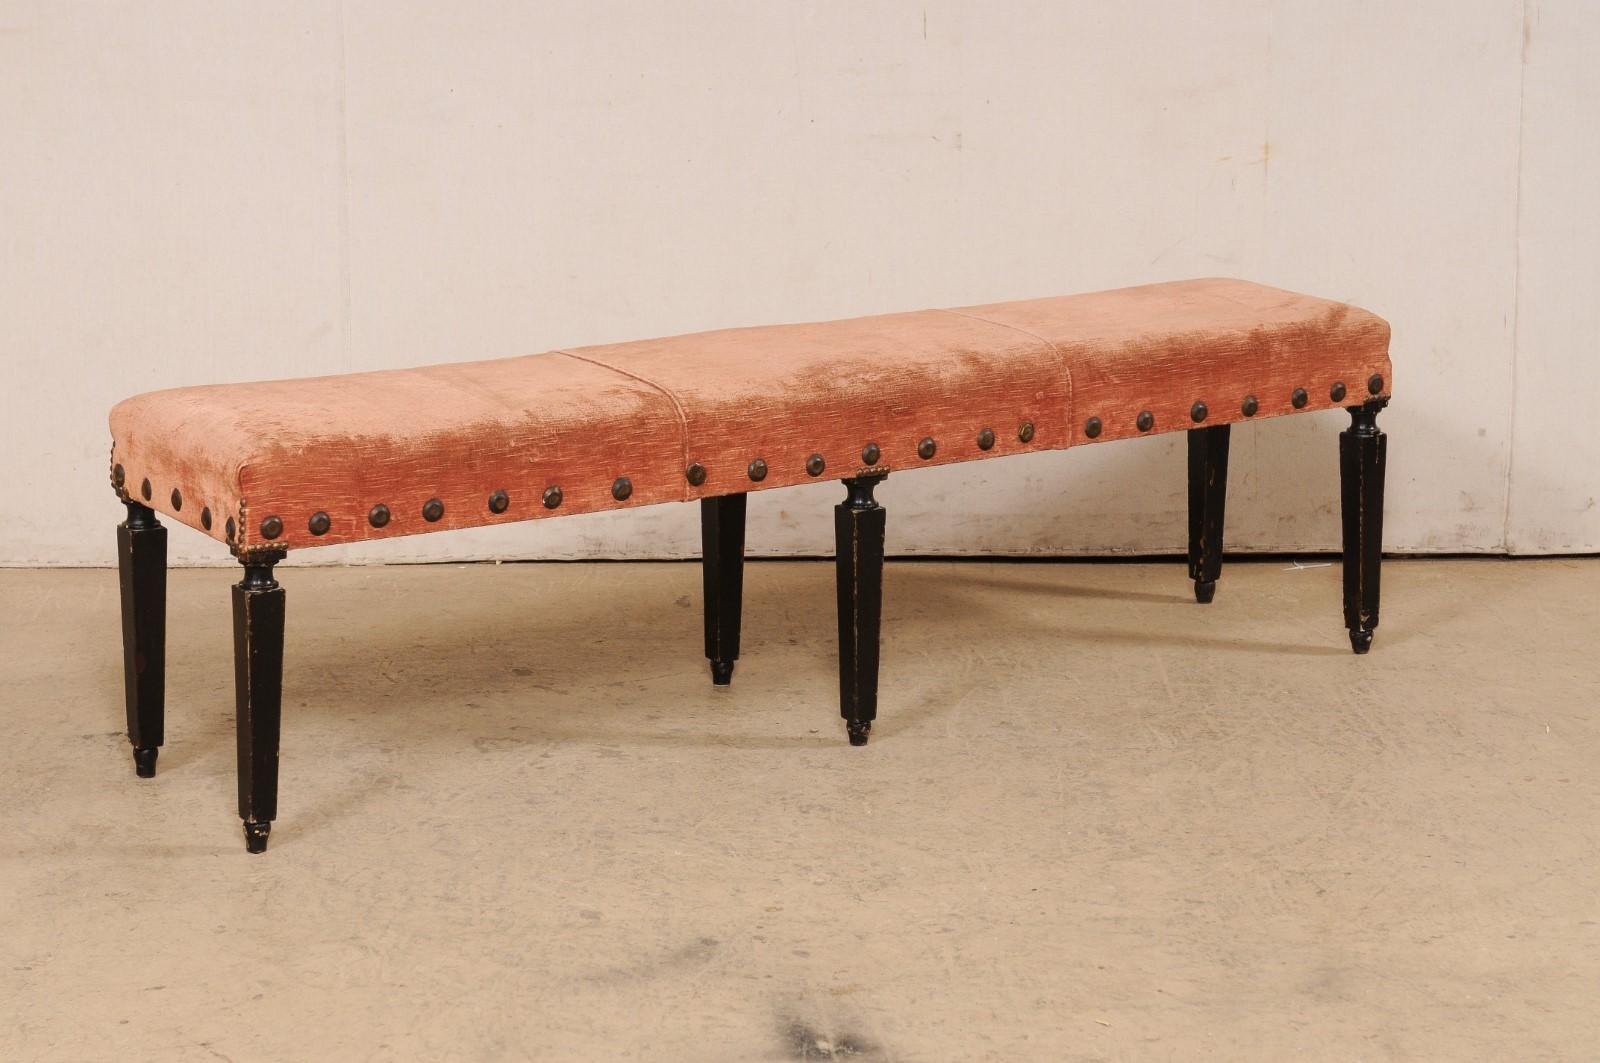 An Italian upholstered bench with carved-wood legs and large nail-head accents, 19th century. This antique from Italy, just over 5.5 feet in length, has an upholstered seat with fantastic iron nail-head accents outlining the seat rail about its